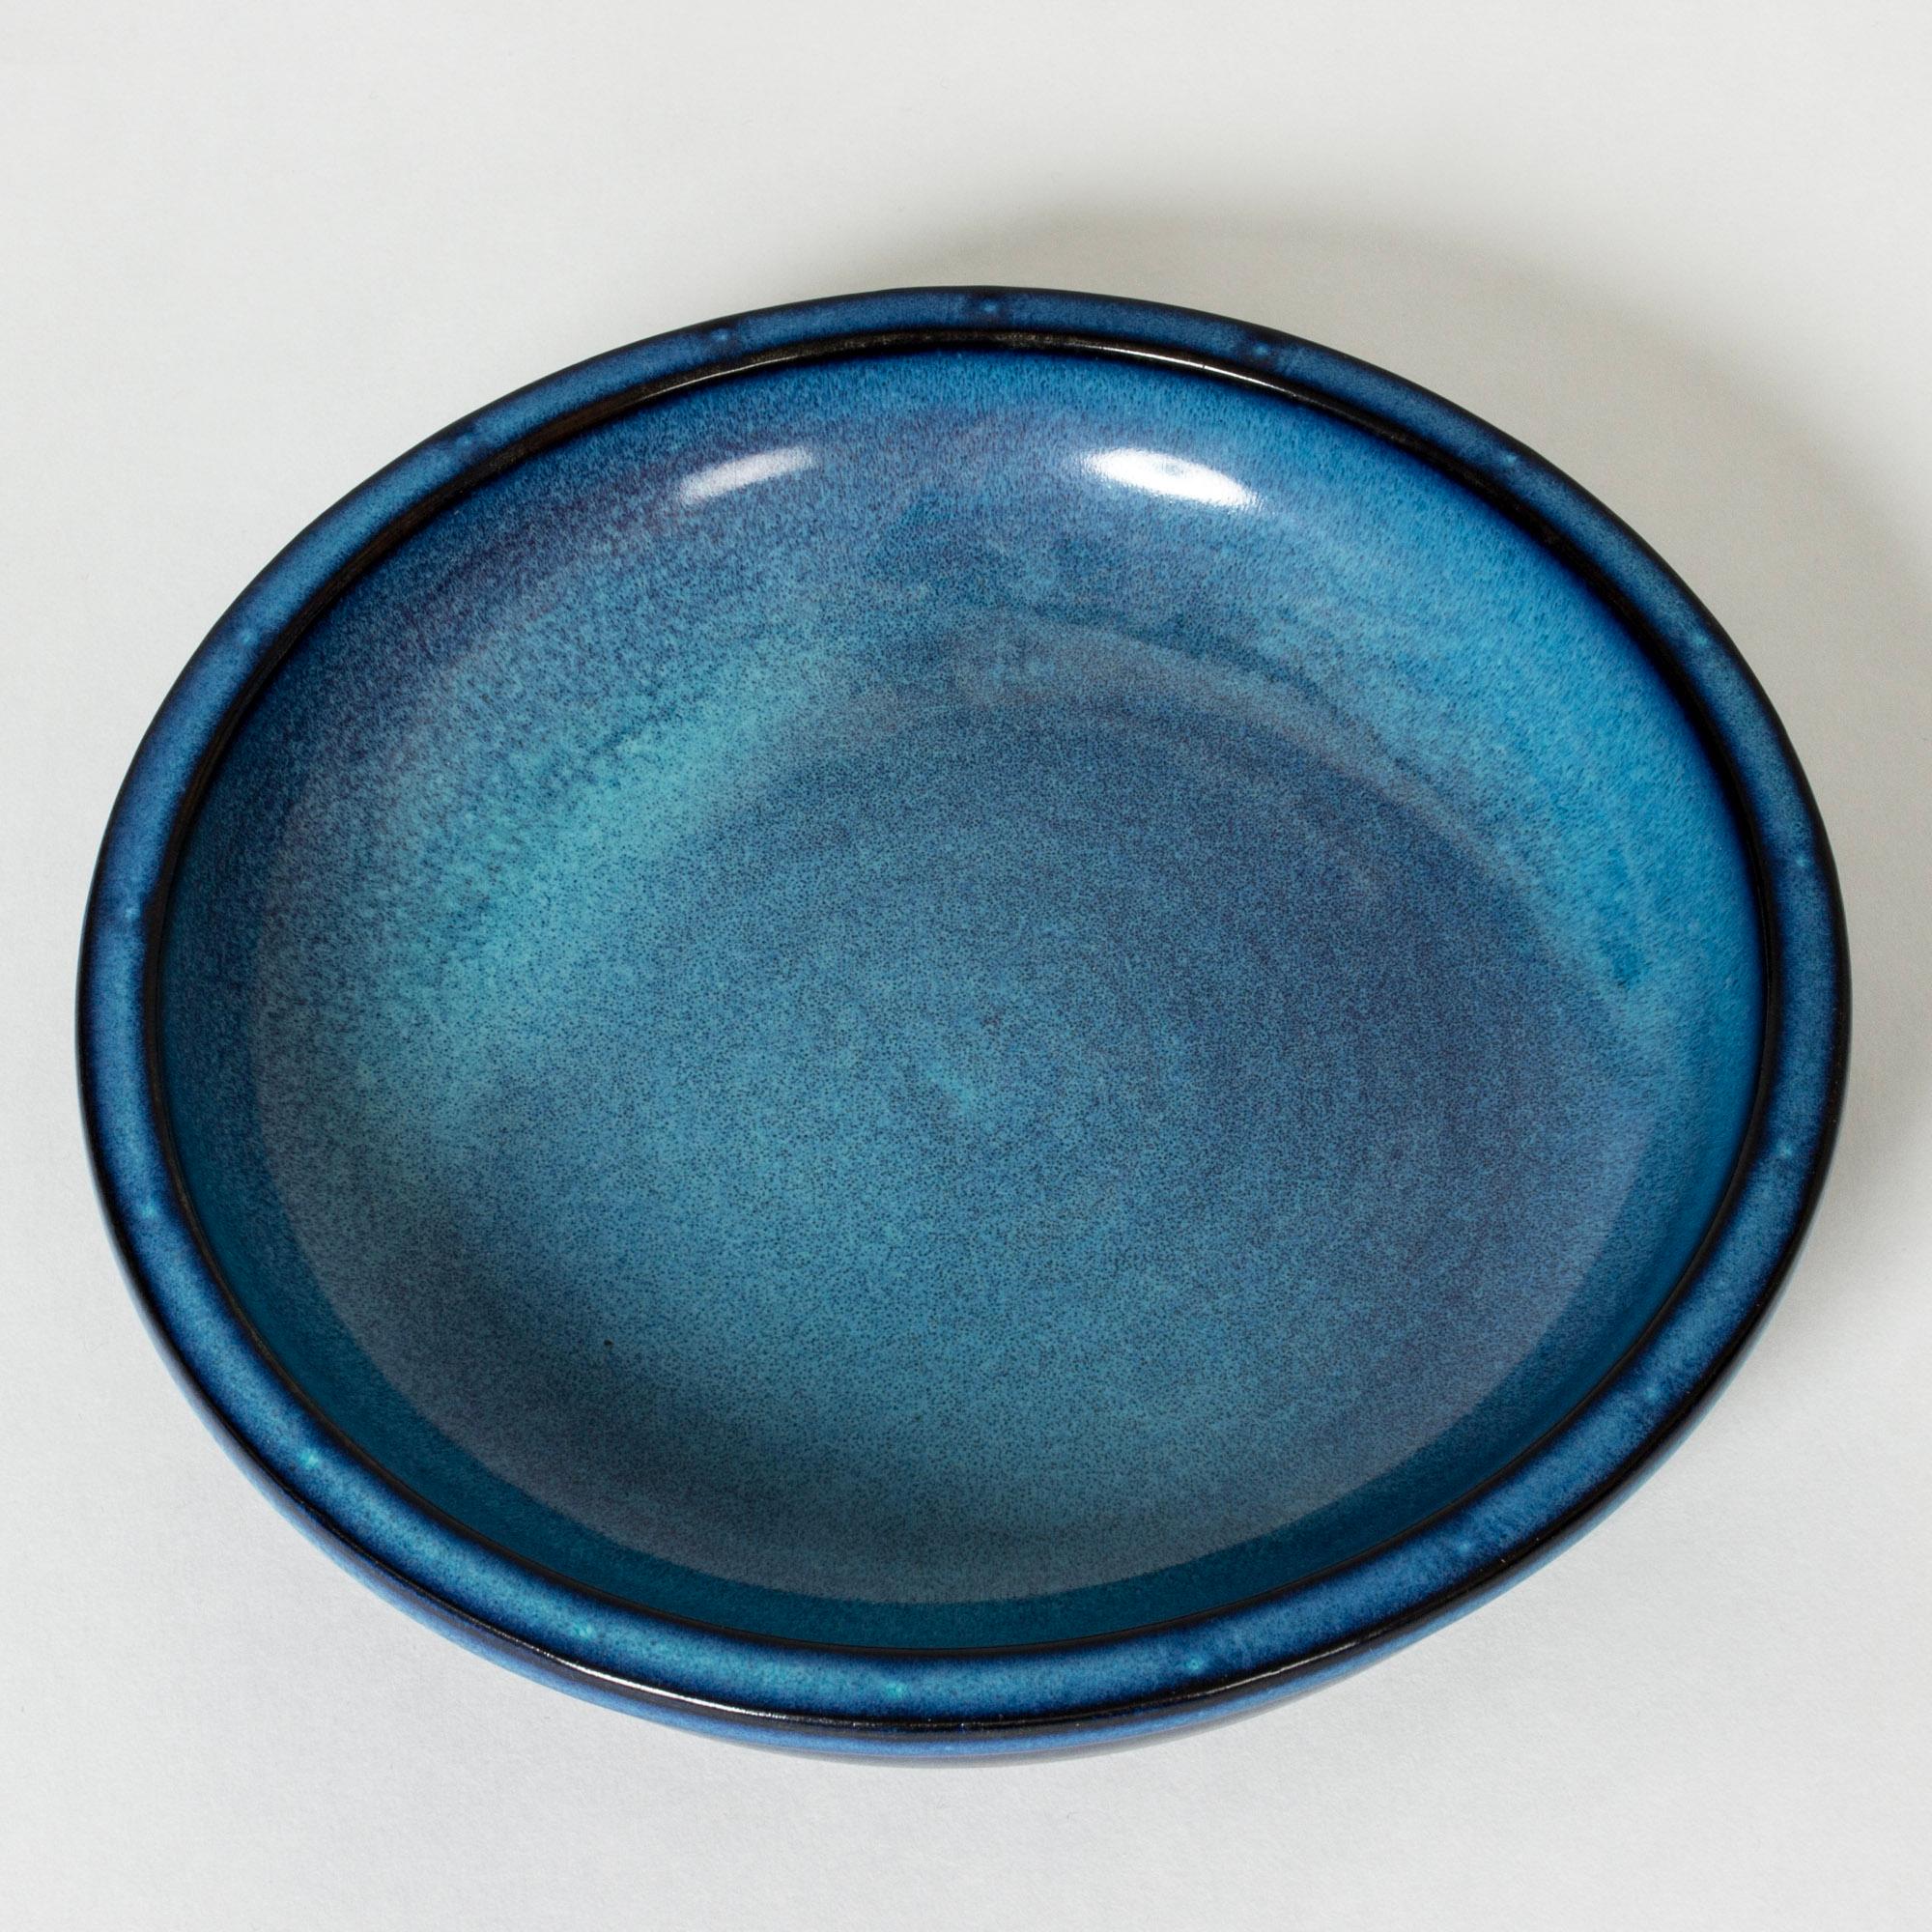 Low “Farsta” bowl or platter, made from stoneware in a smooth, thick form. Vibrant blue glaze.

“Farsta” stoneware is recognized as being the best and most exclusive that has come out of Swedish arts and crafts. The series represents the pinnacle of